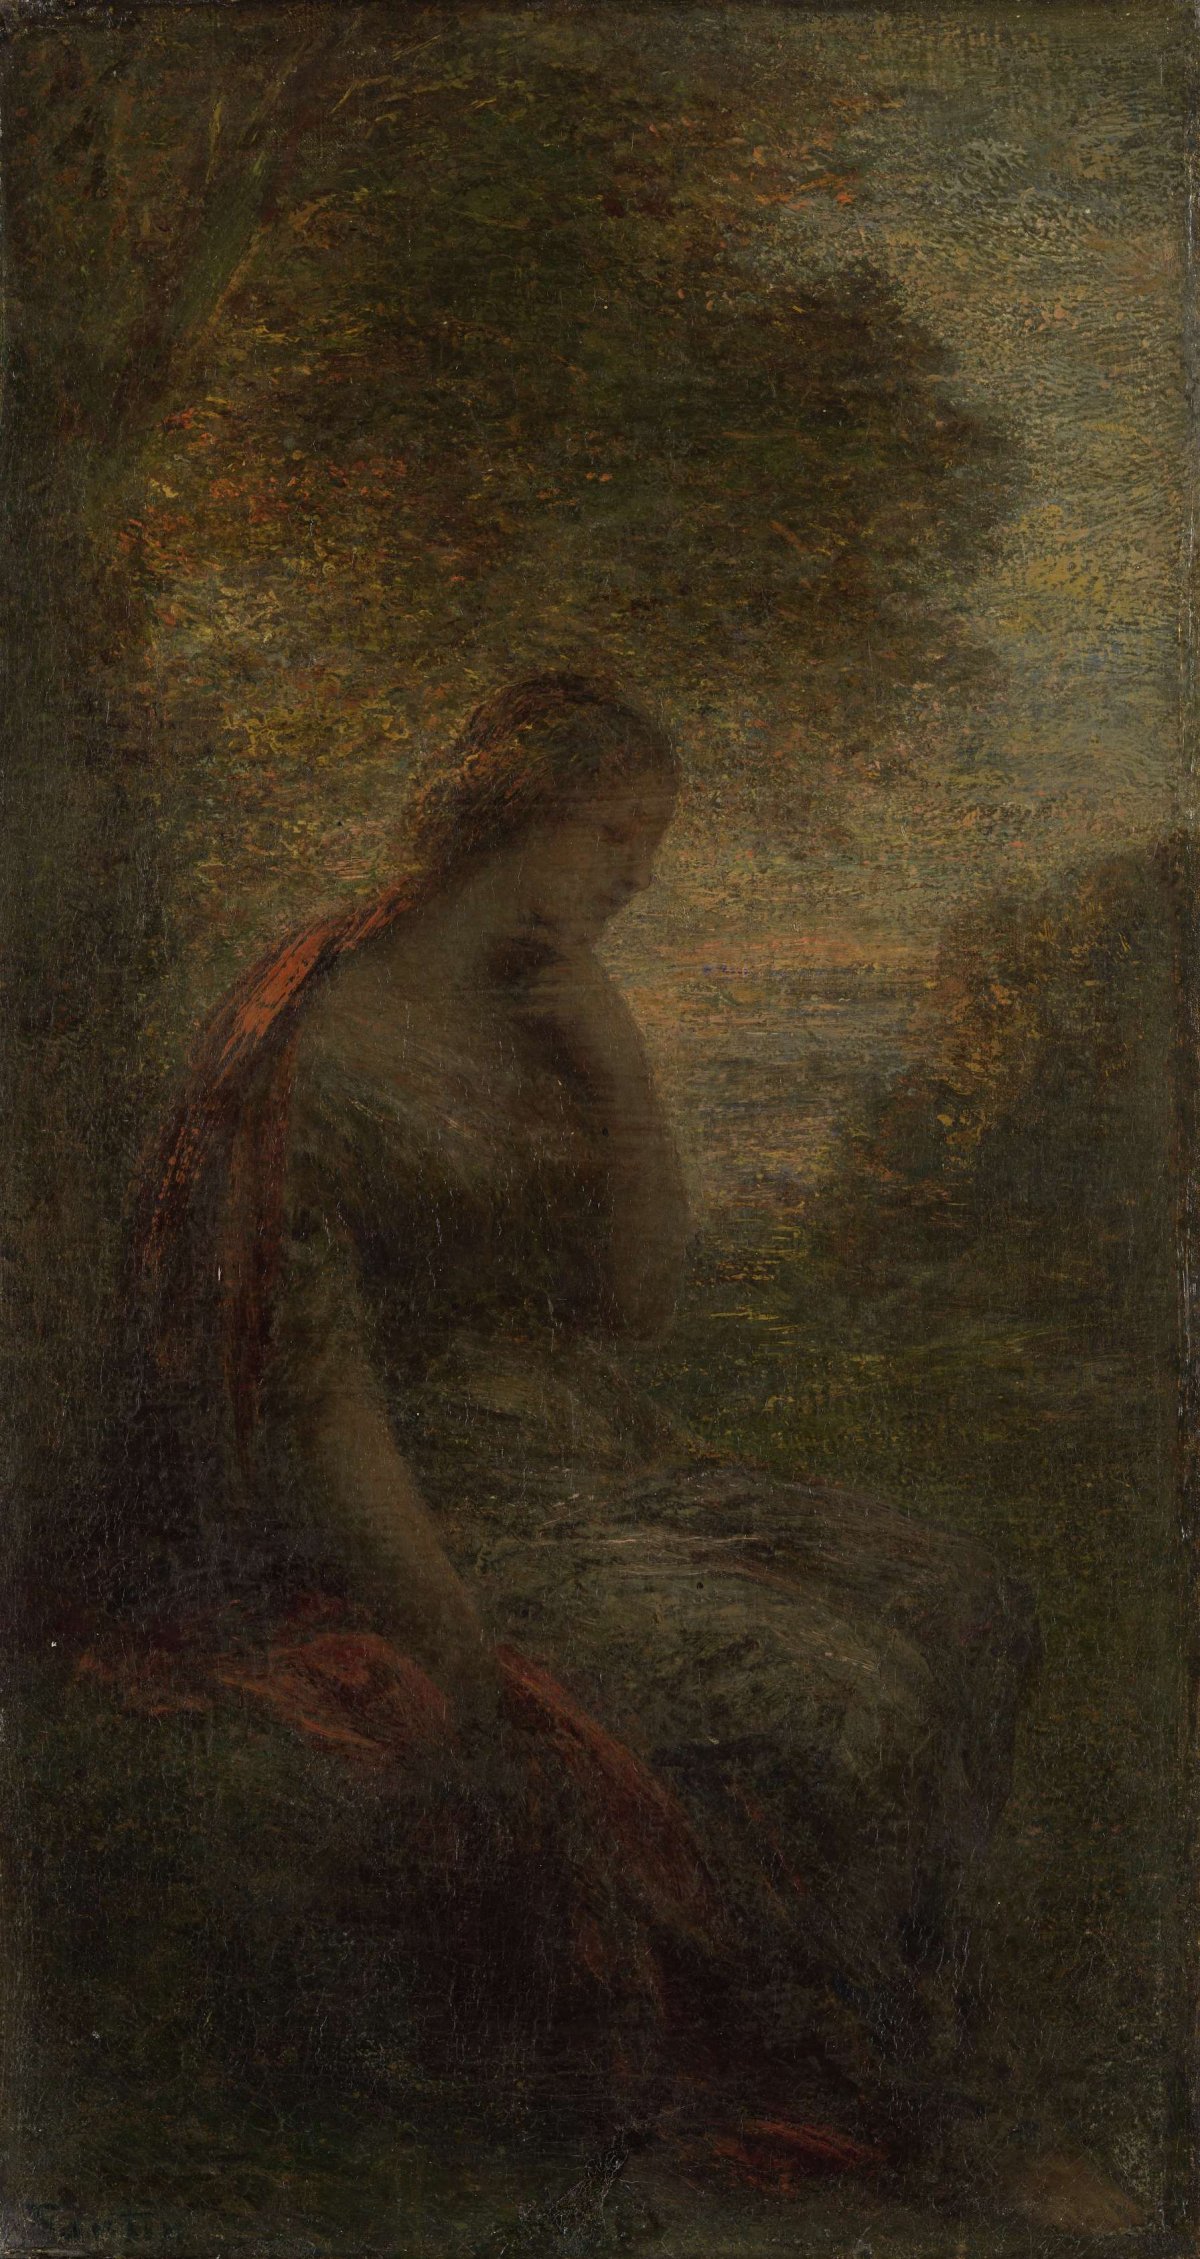 Young Woman under a Tree at Sunset, called 'Autumn', Henri Fantin-Latour, 1855 - 1900